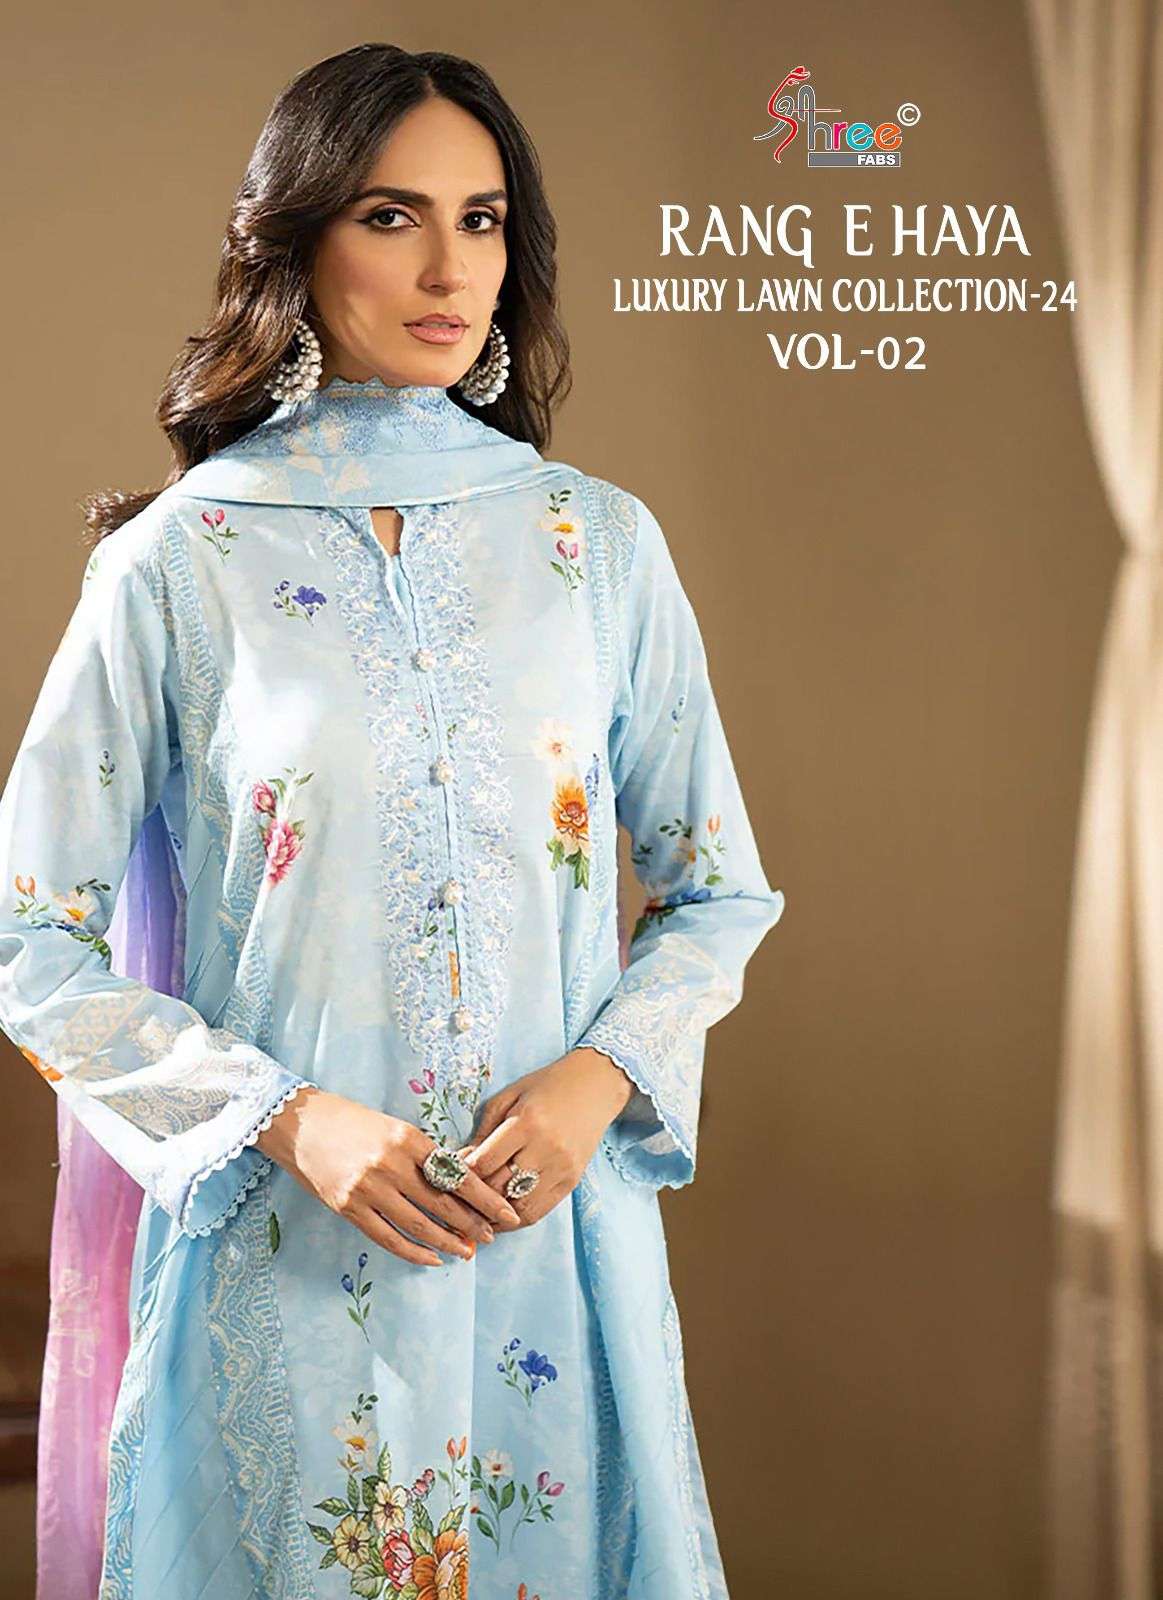 shree fab rang e haya lux lawn collection vol 2 attrective look salwar suit with cotton dupatta catalog